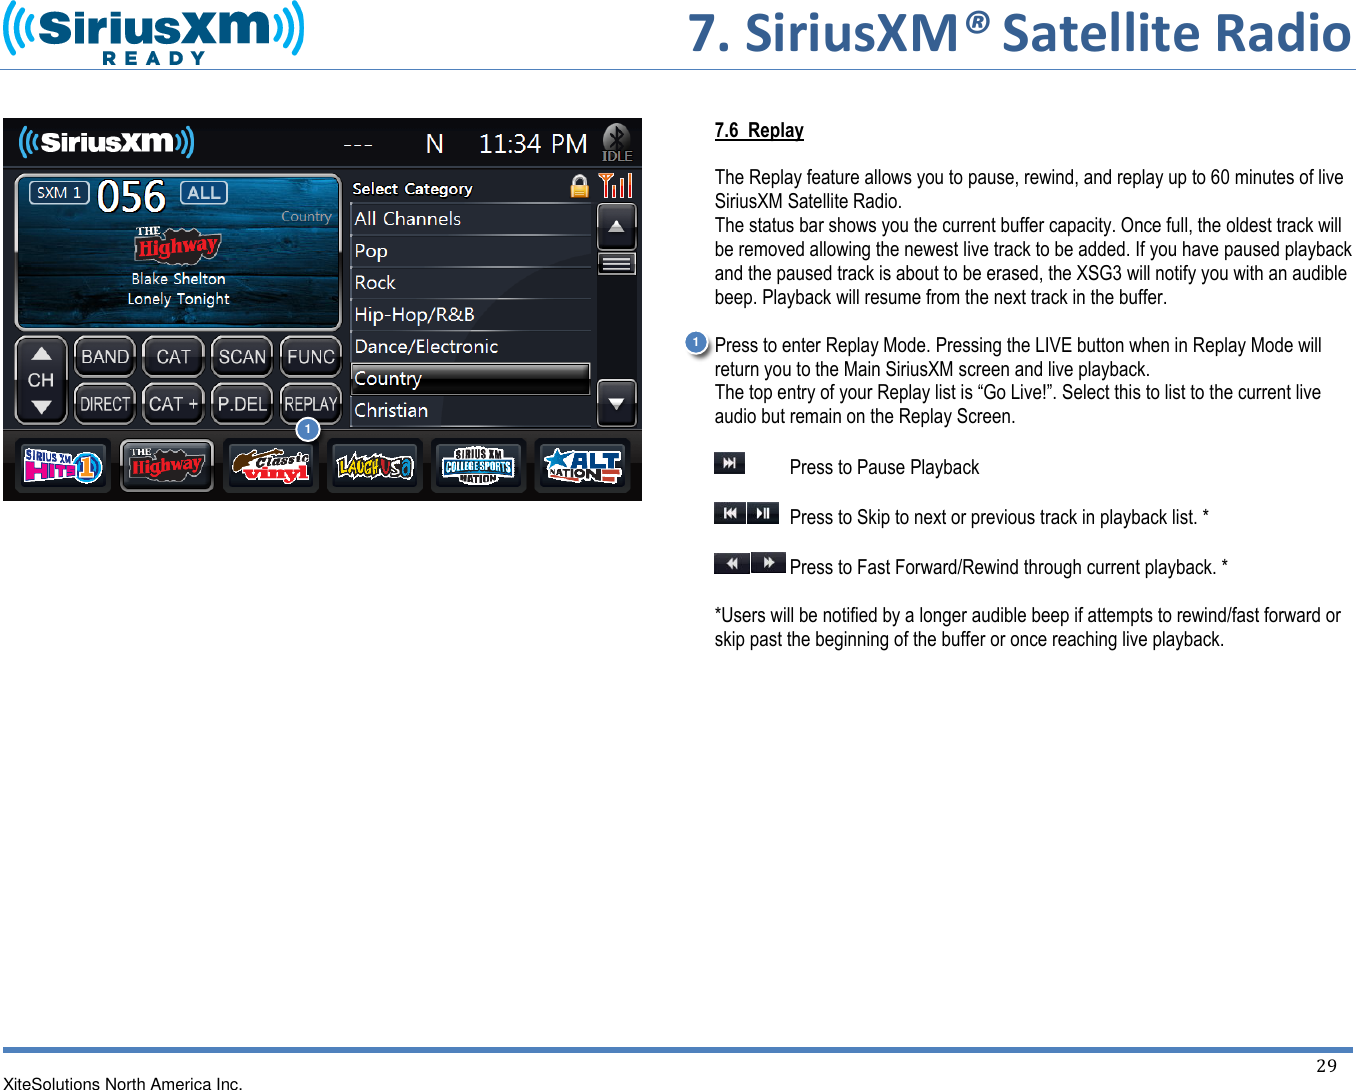       7. SiriusXM® Satellite Radio   XiteSolutions North America Inc.    29                          7.6  Replay  The Replay feature allows you to pause, rewind, and replay up to 60 minutes of live SiriusXM Satellite Radio. The status bar shows you the current buffer capacity. Once full, the oldest track will be removed allowing the newest live track to be added. If you have paused playback and the paused track is about to be erased, the XSG3 will notify you with an audible beep. Playback will resume from the next track in the buffer.  Press to enter Replay Mode. Pressing the LIVE button when in Replay Mode will return you to the Main SiriusXM screen and live playback. The top entry of your Replay list is “Go Live!”. Select this to list to the current live audio but remain on the Replay Screen.    Press to Pause Playback    Press to Skip to next or previous track in playback list. *   Press to Fast Forward/Rewind through current playback. *  *Users will be notified by a longer audible beep if attempts to rewind/fast forward or skip past the beginning of the buffer or once reaching live playback.           1 1 